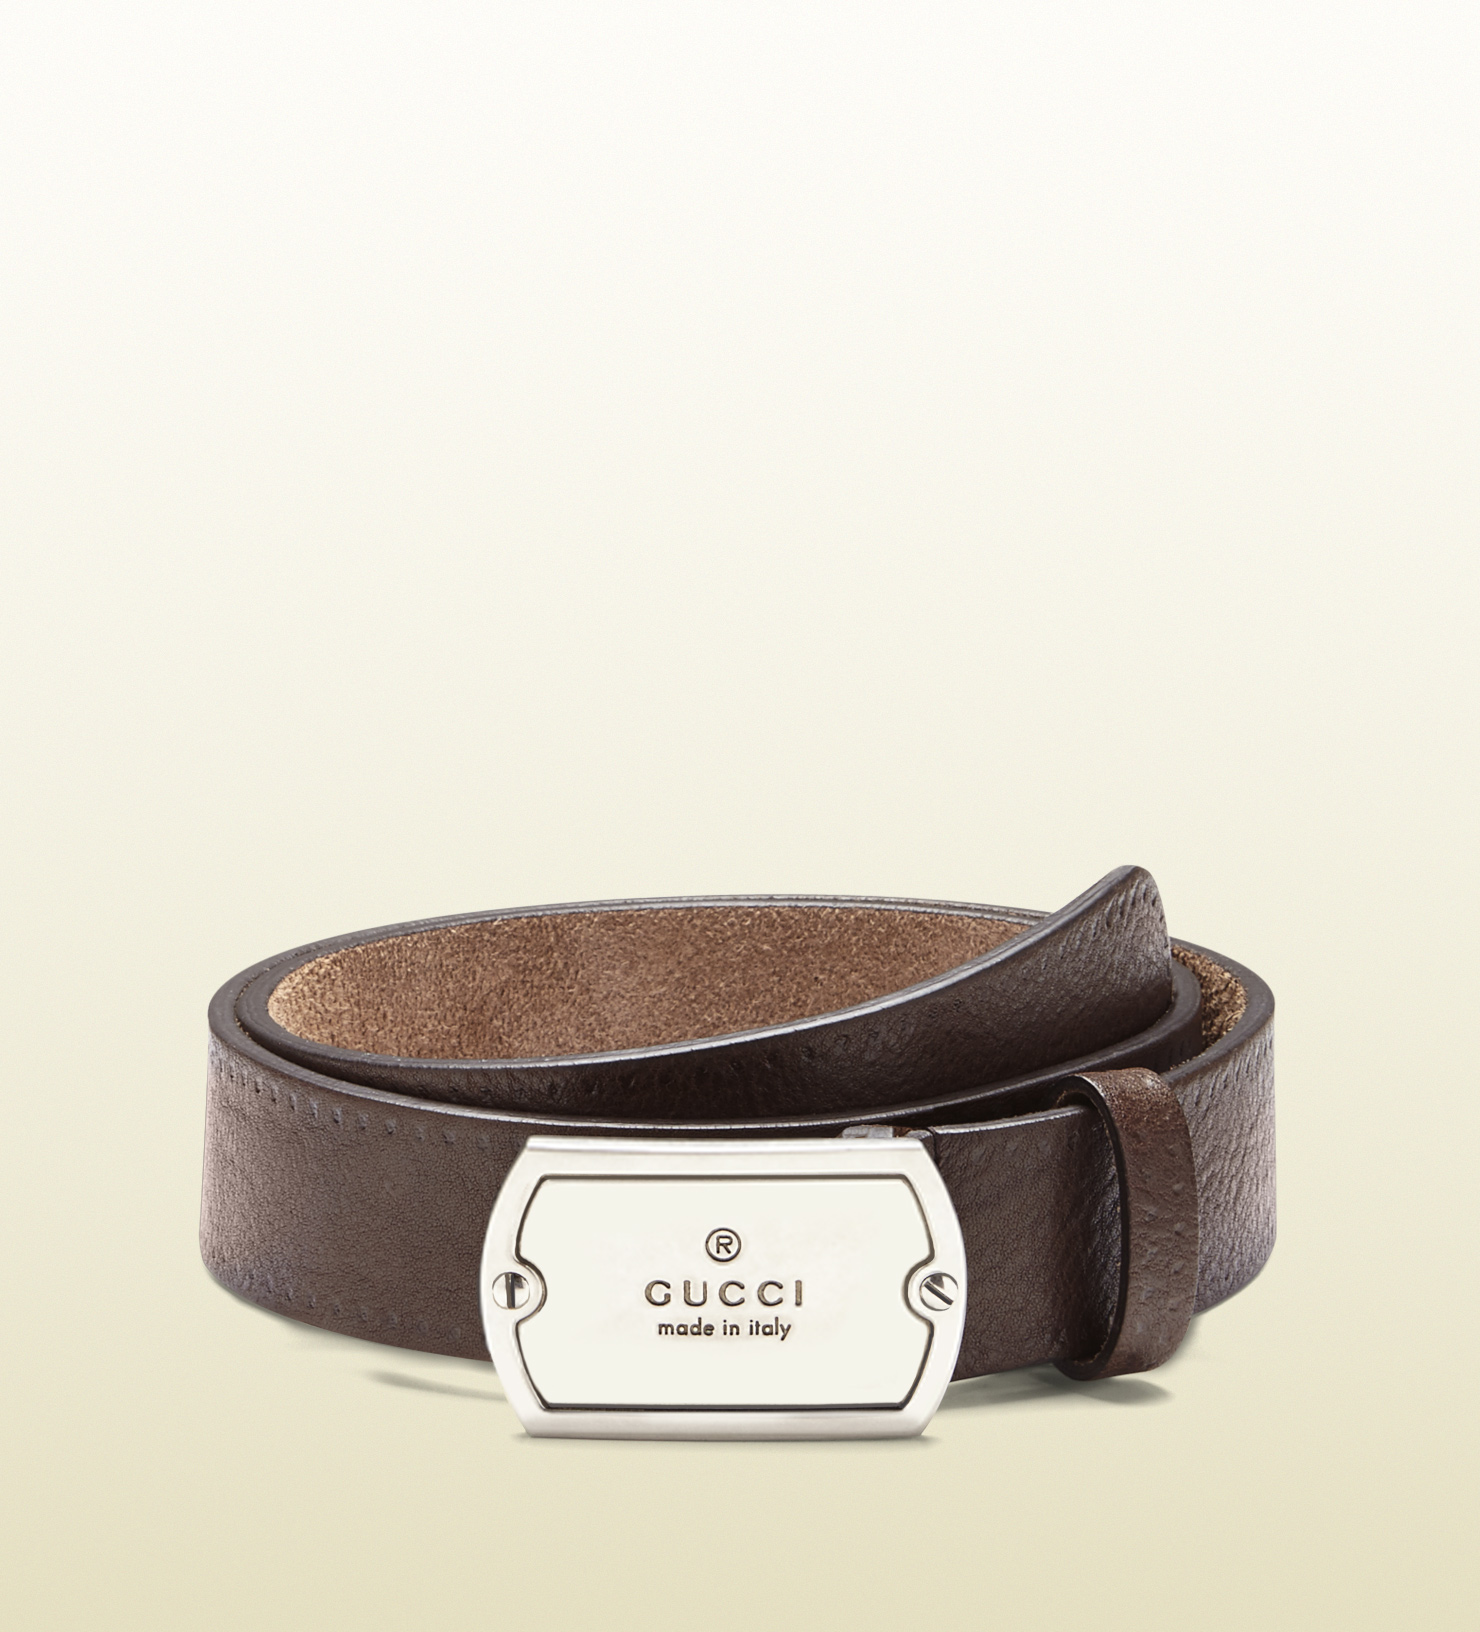 Gucci Brown Leather Belt With Dog Tag Buckle for Men - Lyst